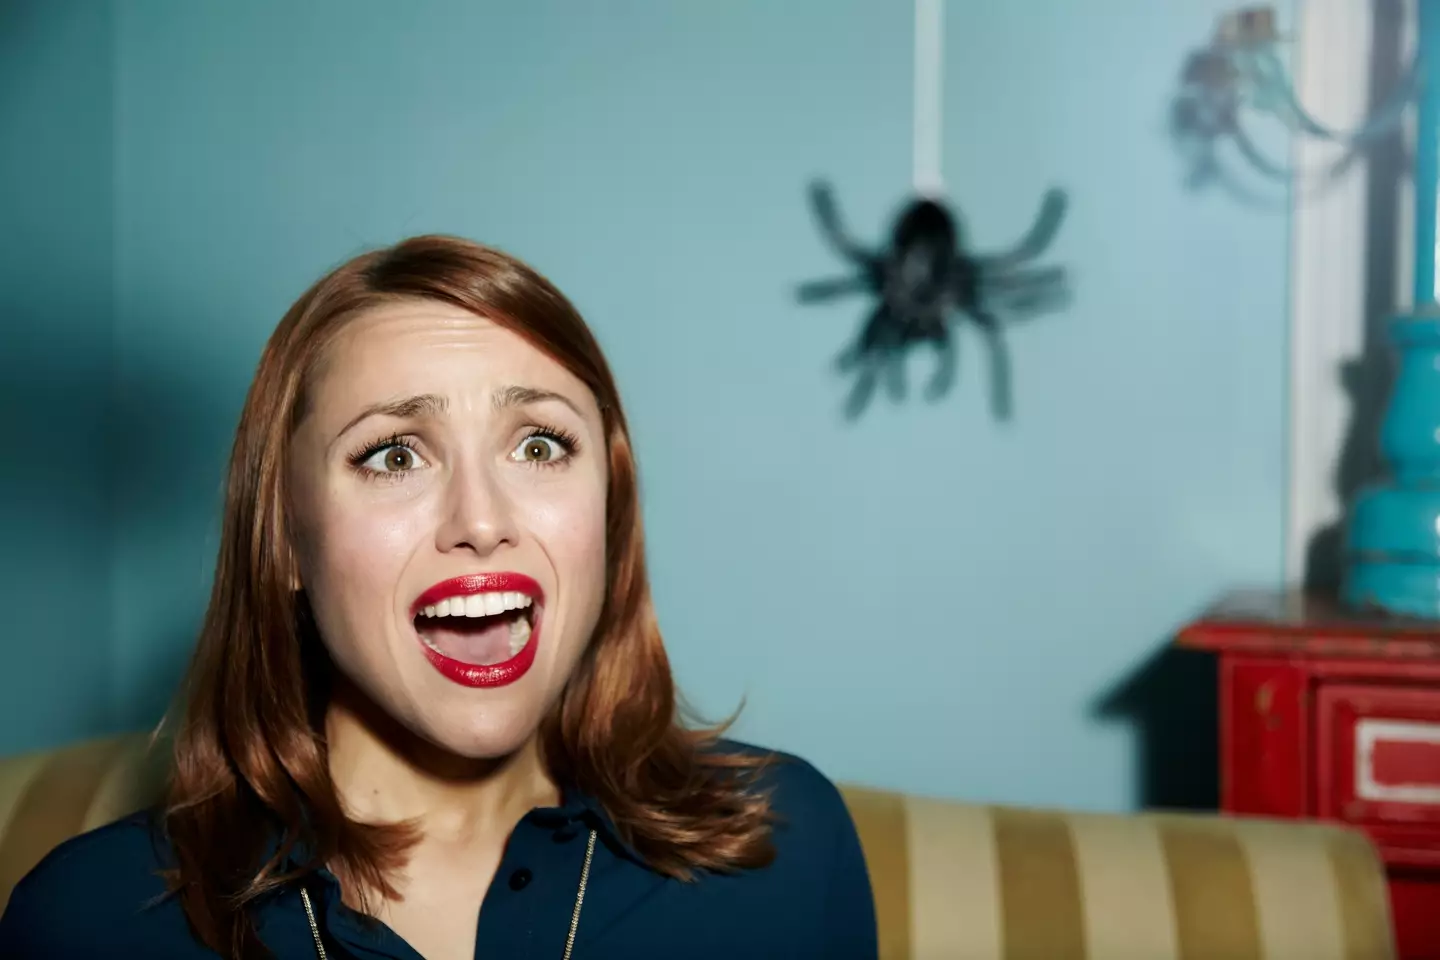 "Oh no, a giant spider! Good thing I remembered to put my lipstick on for this scream."